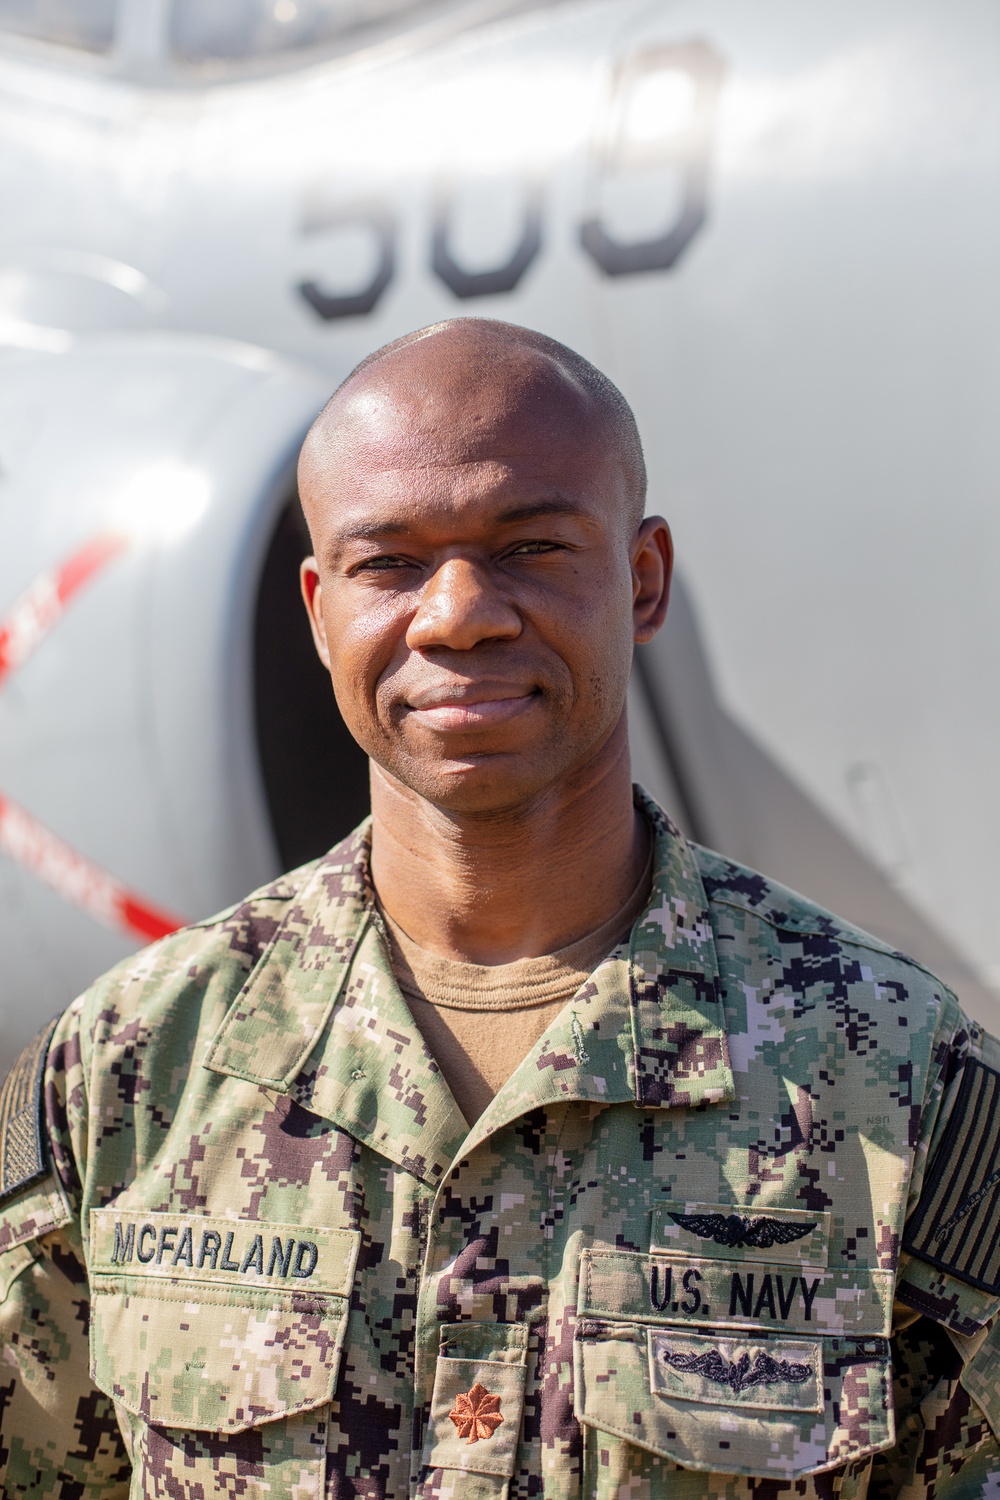 From rural Louisiana to U.S. Navy Supply Corps Officer